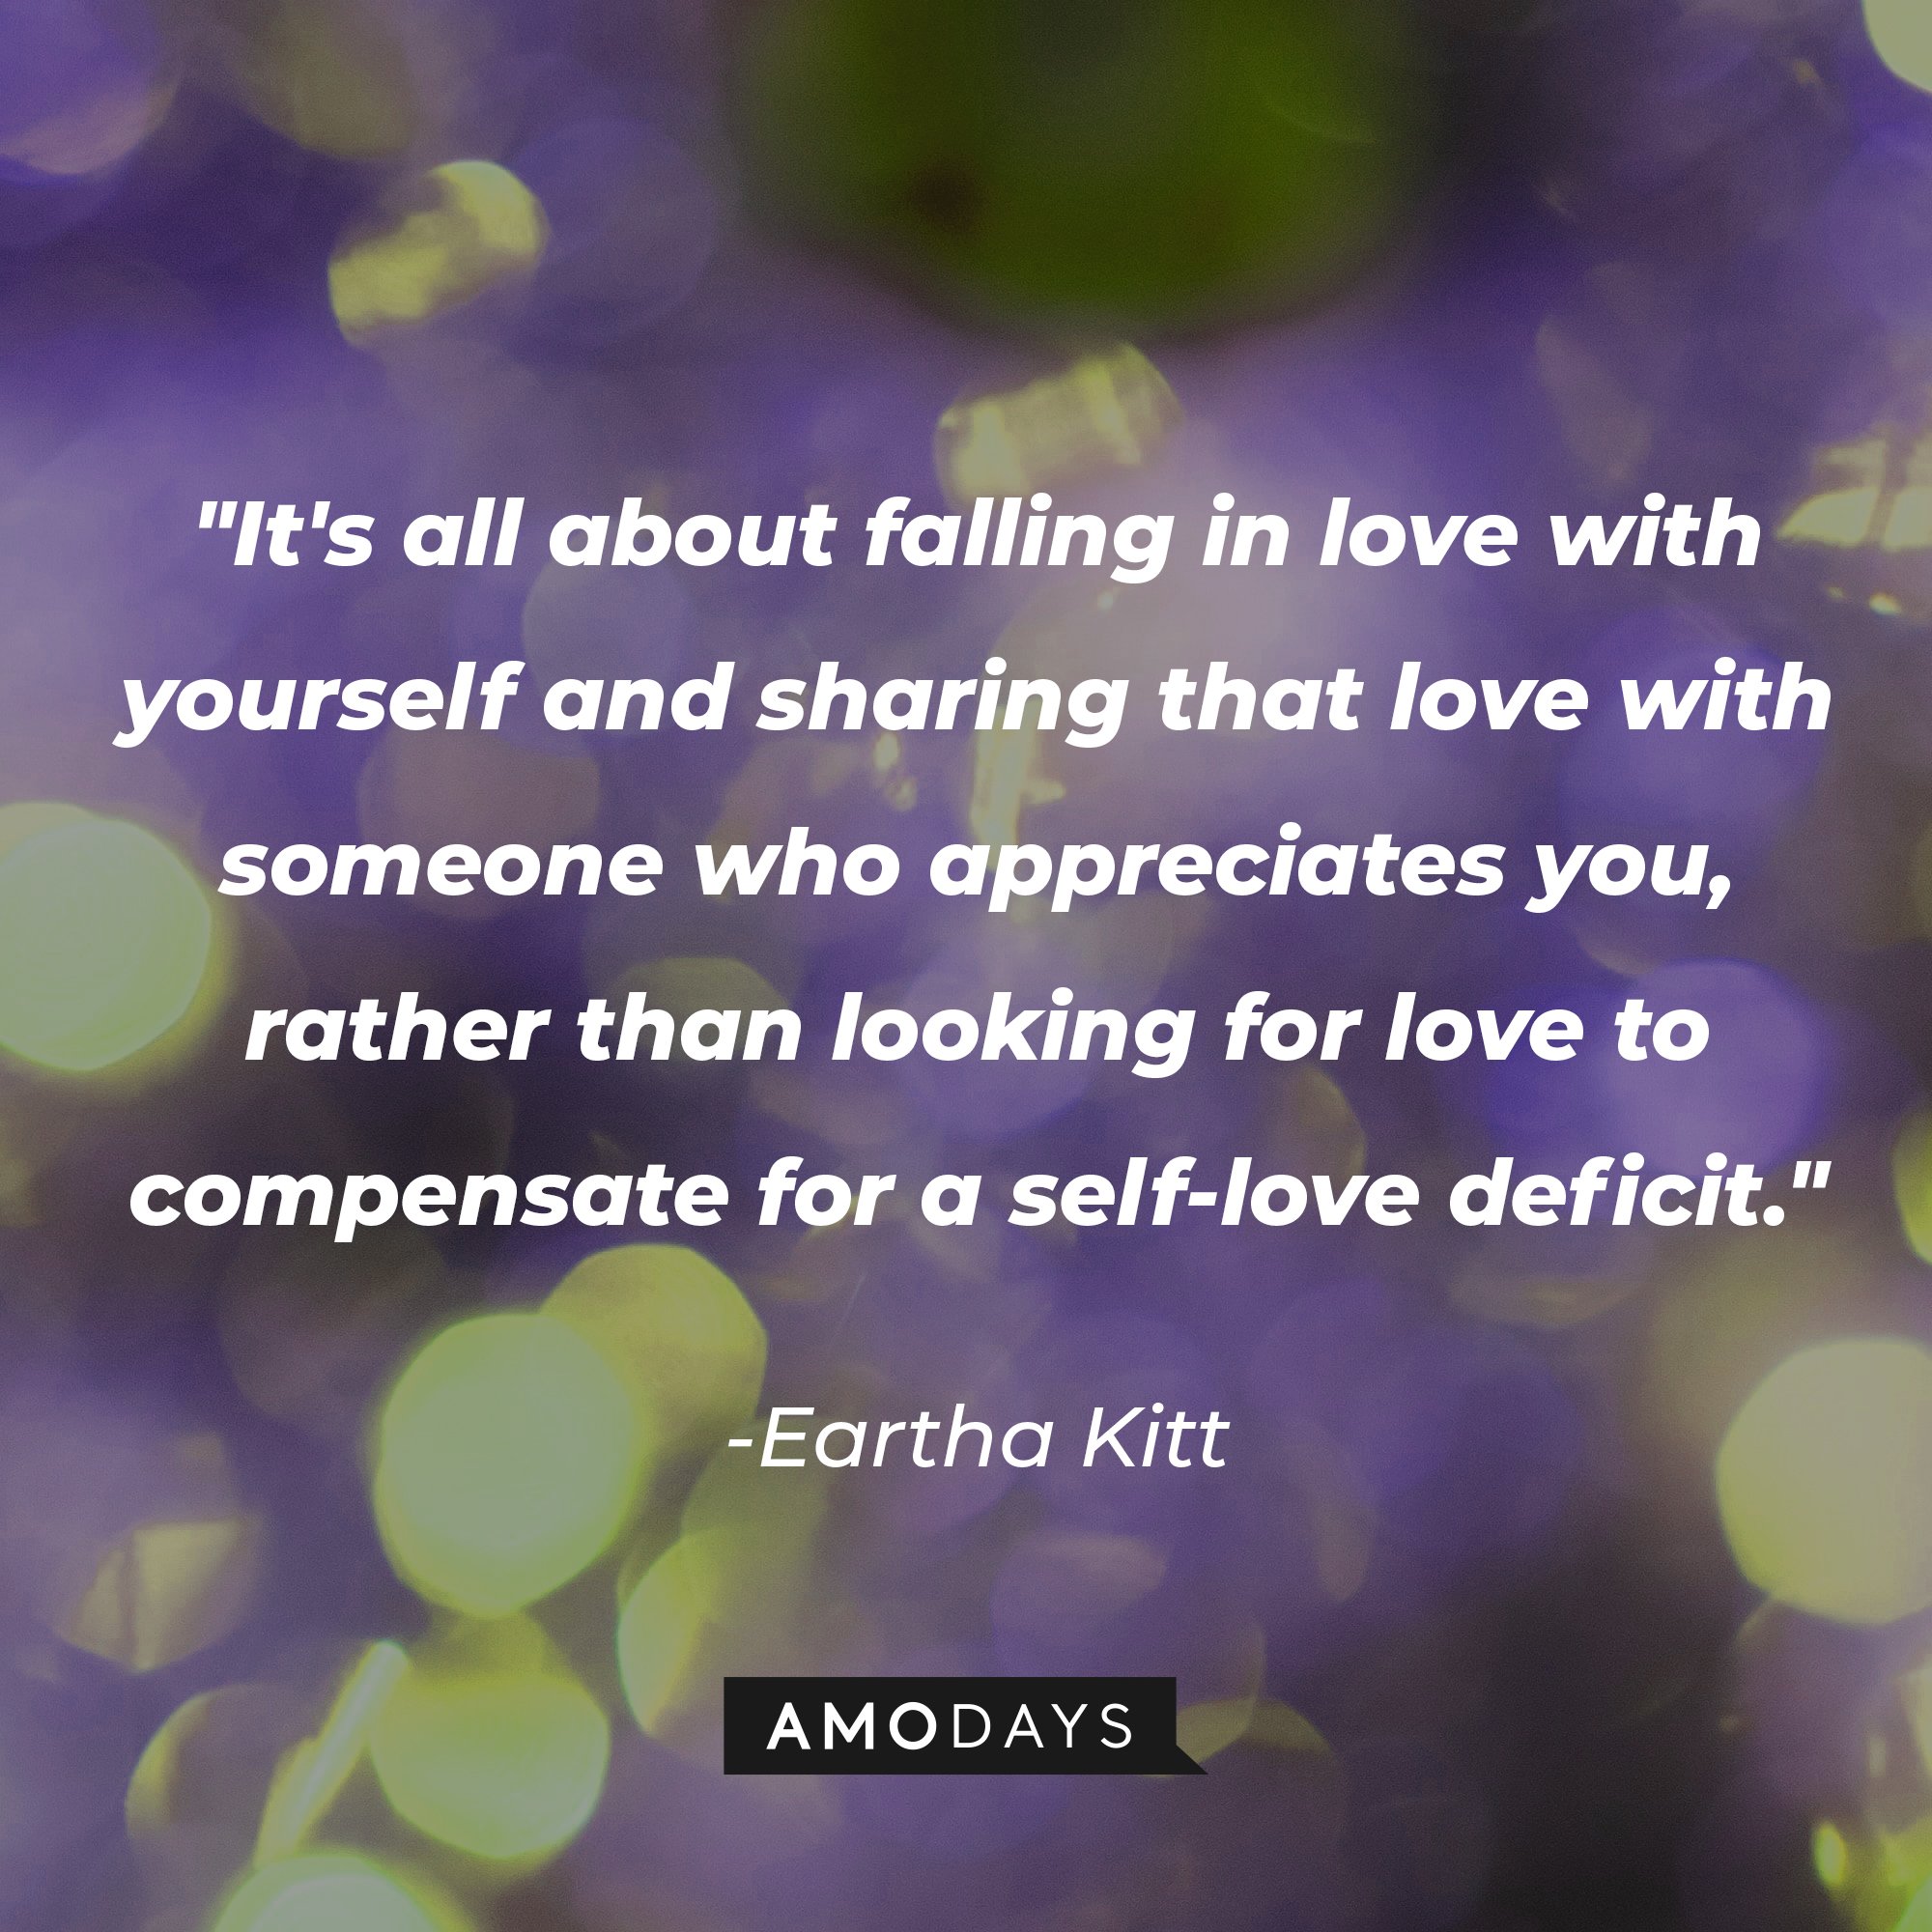 Eartha Kitt’s quote: "It's all about falling in love with yourself and sharing that love with someone who appreciates you, rather than looking for love to compensate for a self-love deficit." | Image: AmoDays